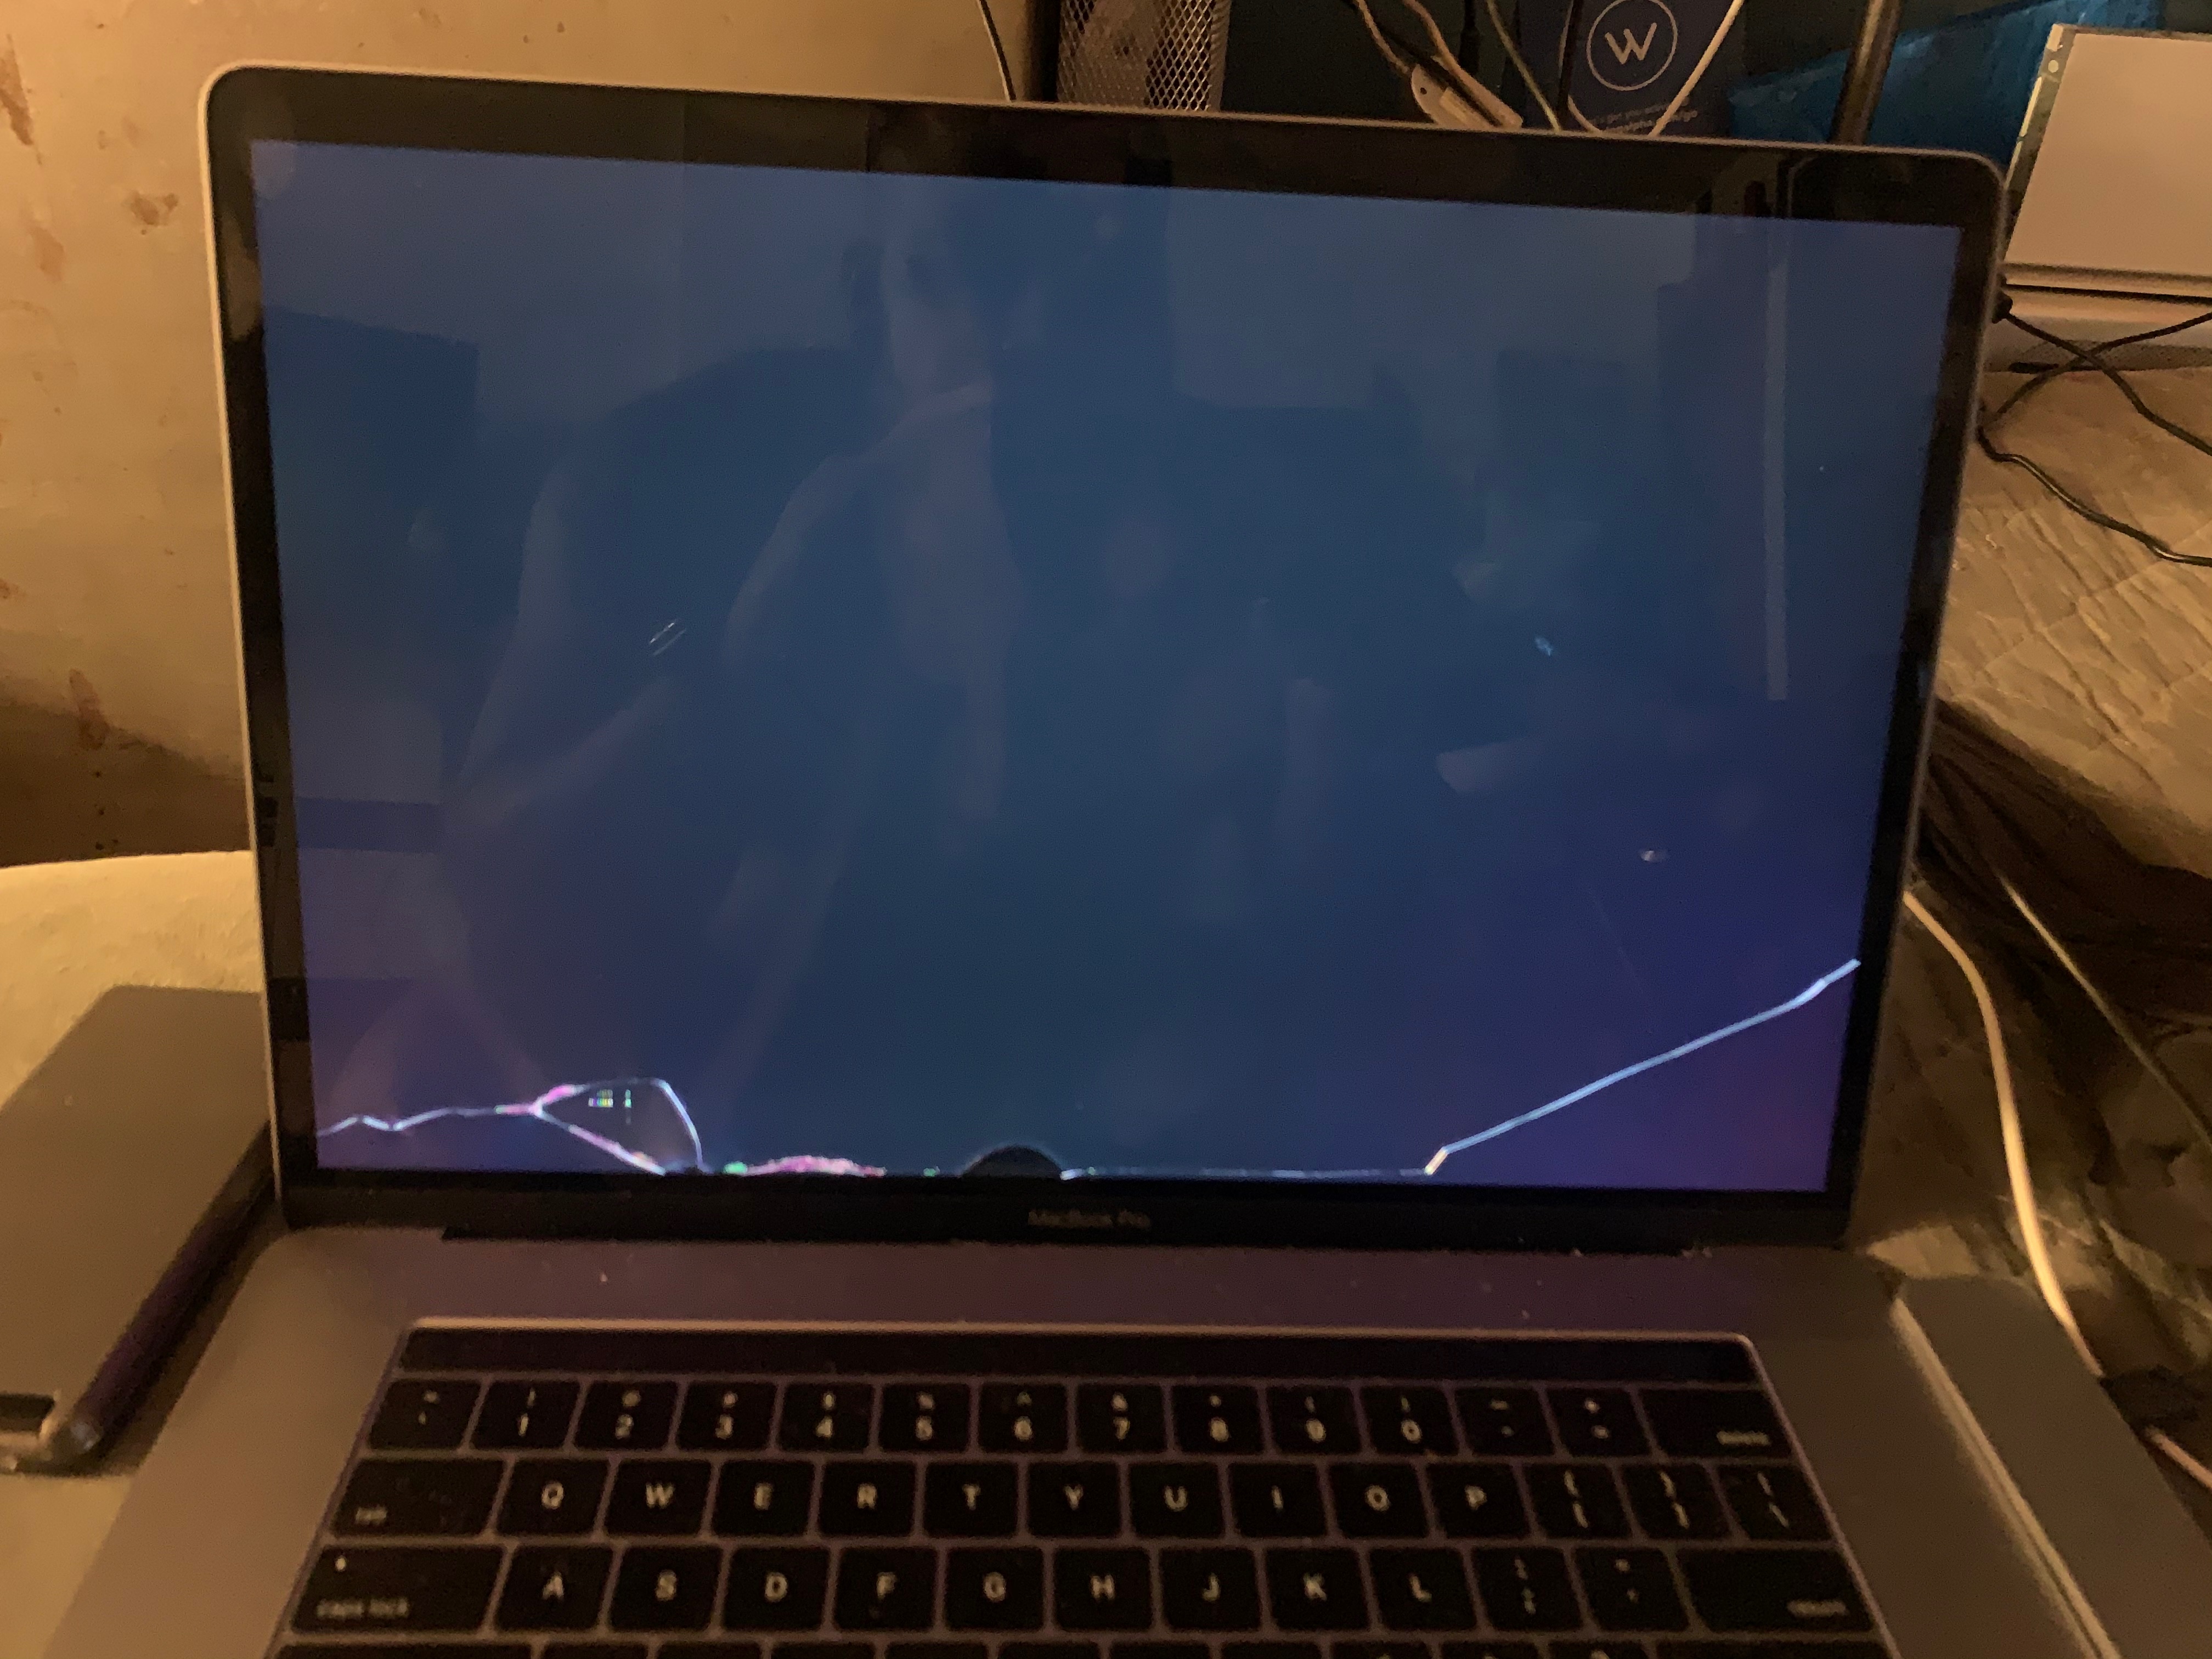 Fixing a Cracked Display on 15-inch MacBook Pro